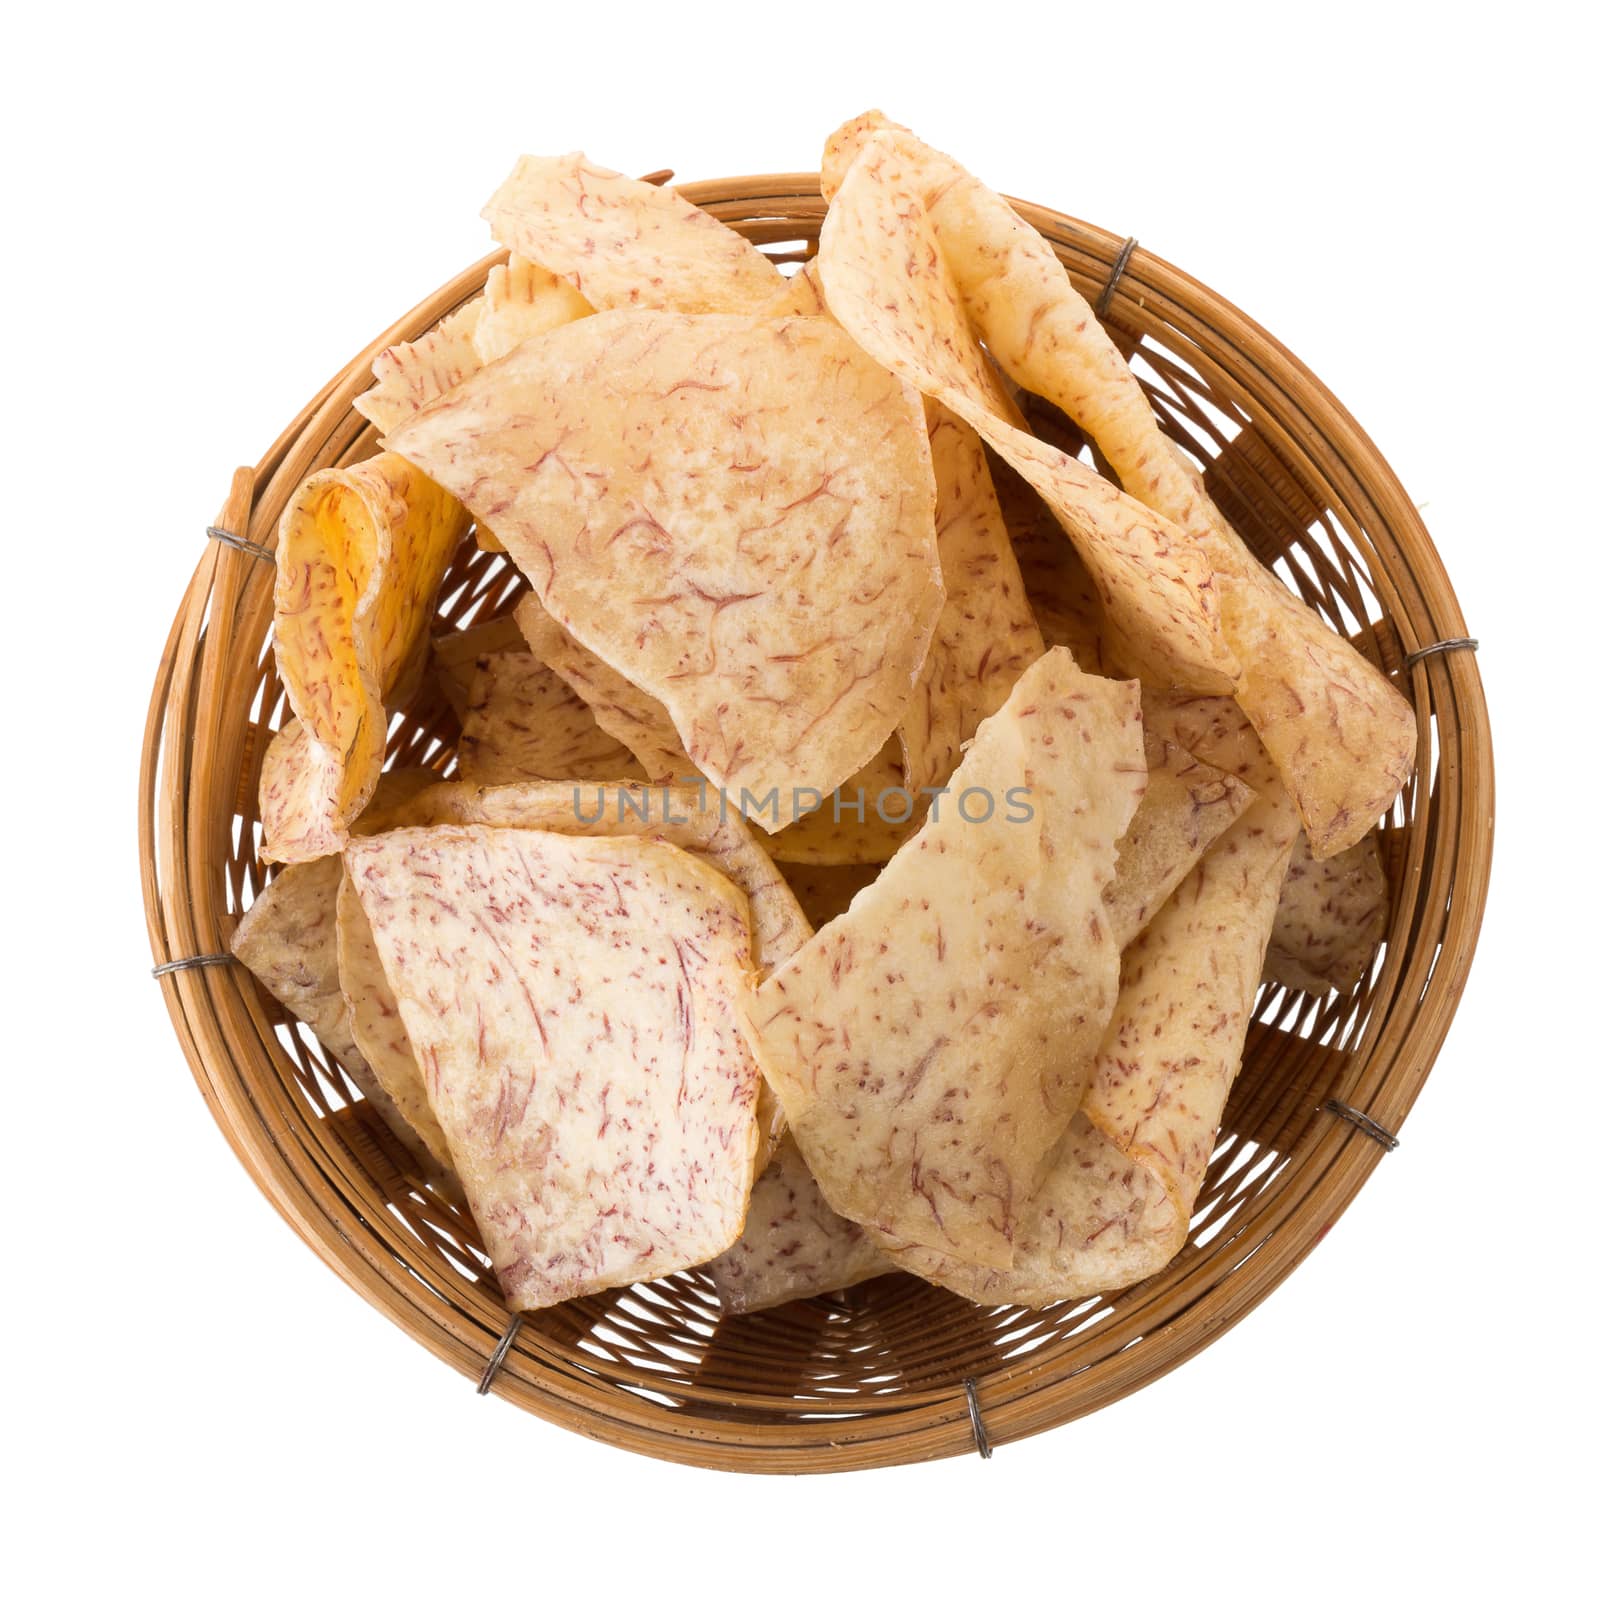 fried Taro slices Dip into the caramel In the basket isolated on white background.